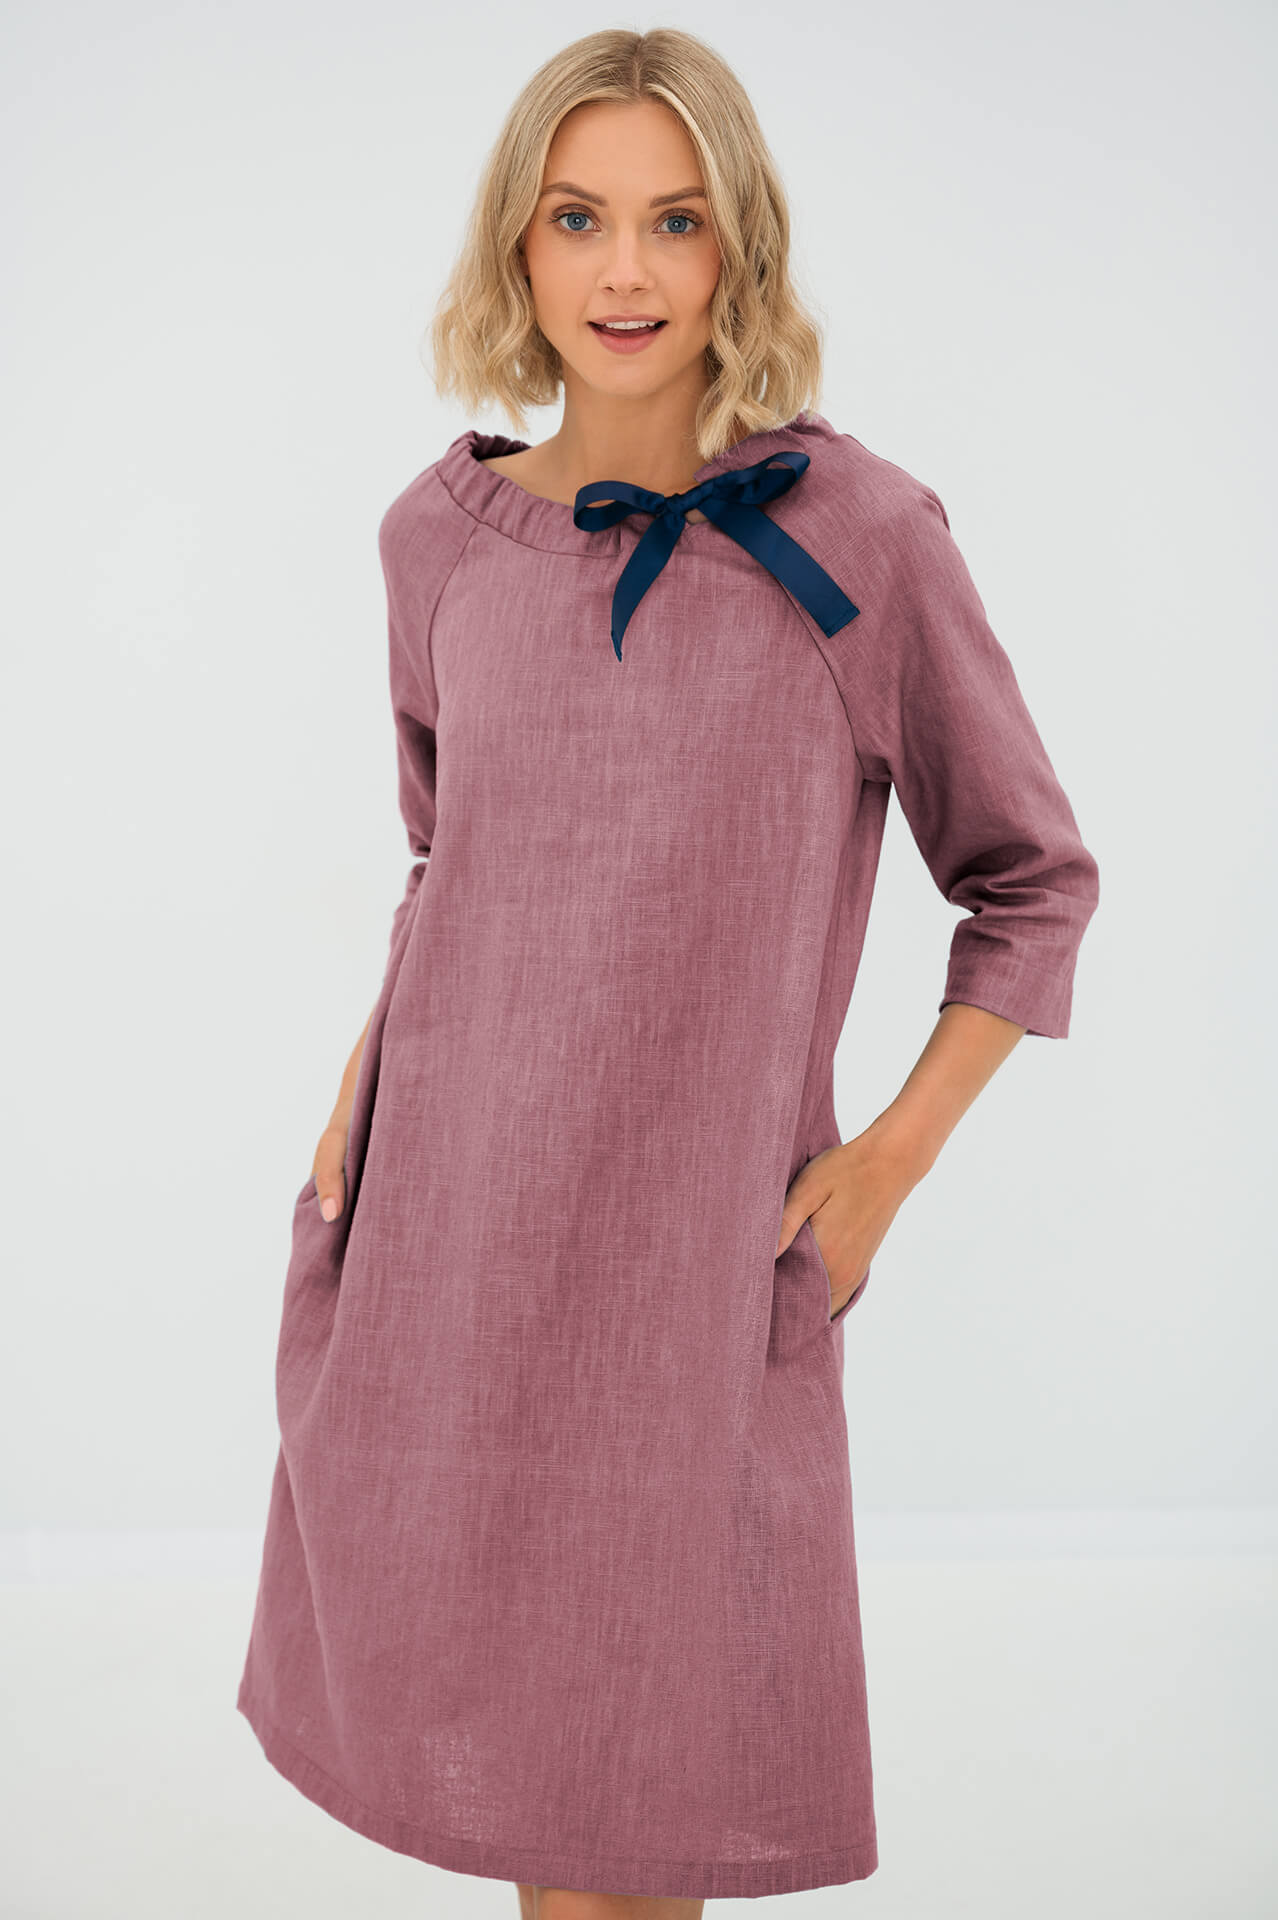 Linen midi dress with sleeves in dusty rose FRENCH